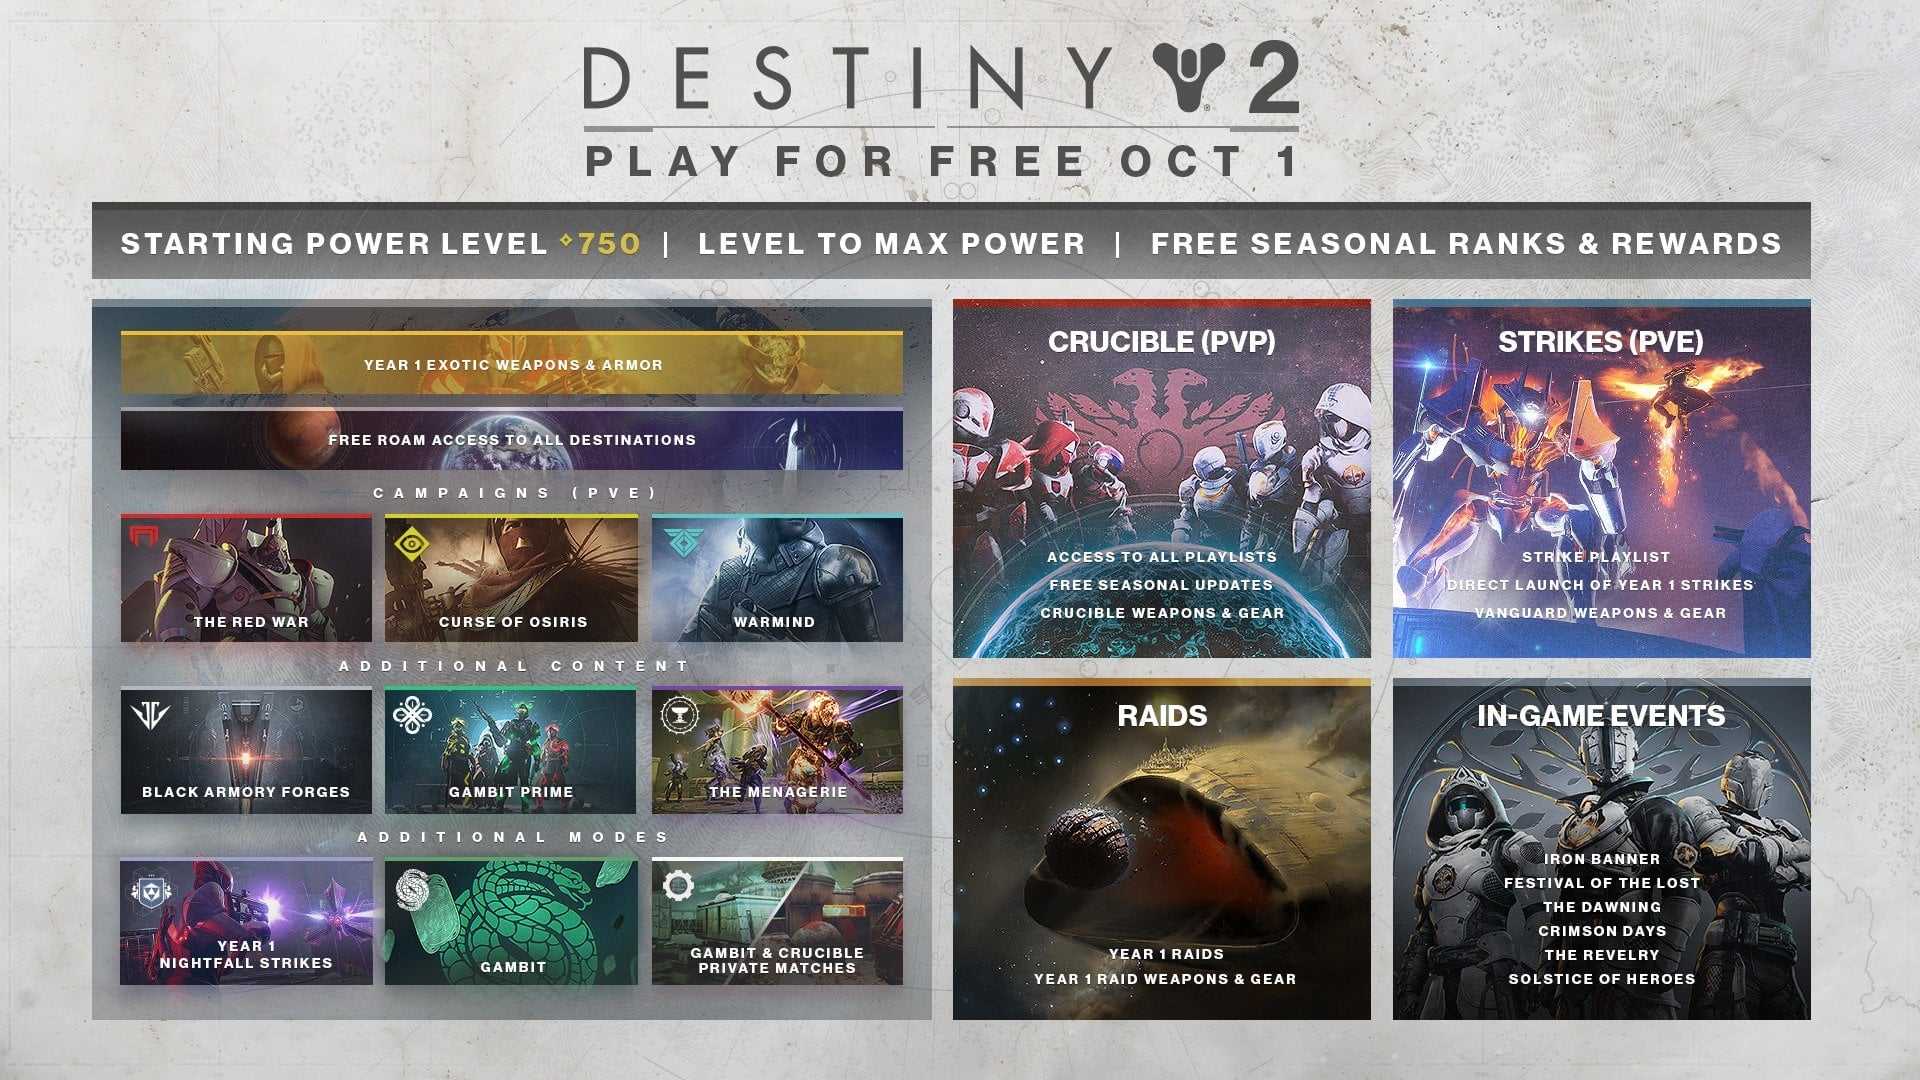 Destiny 2 Included in New Light